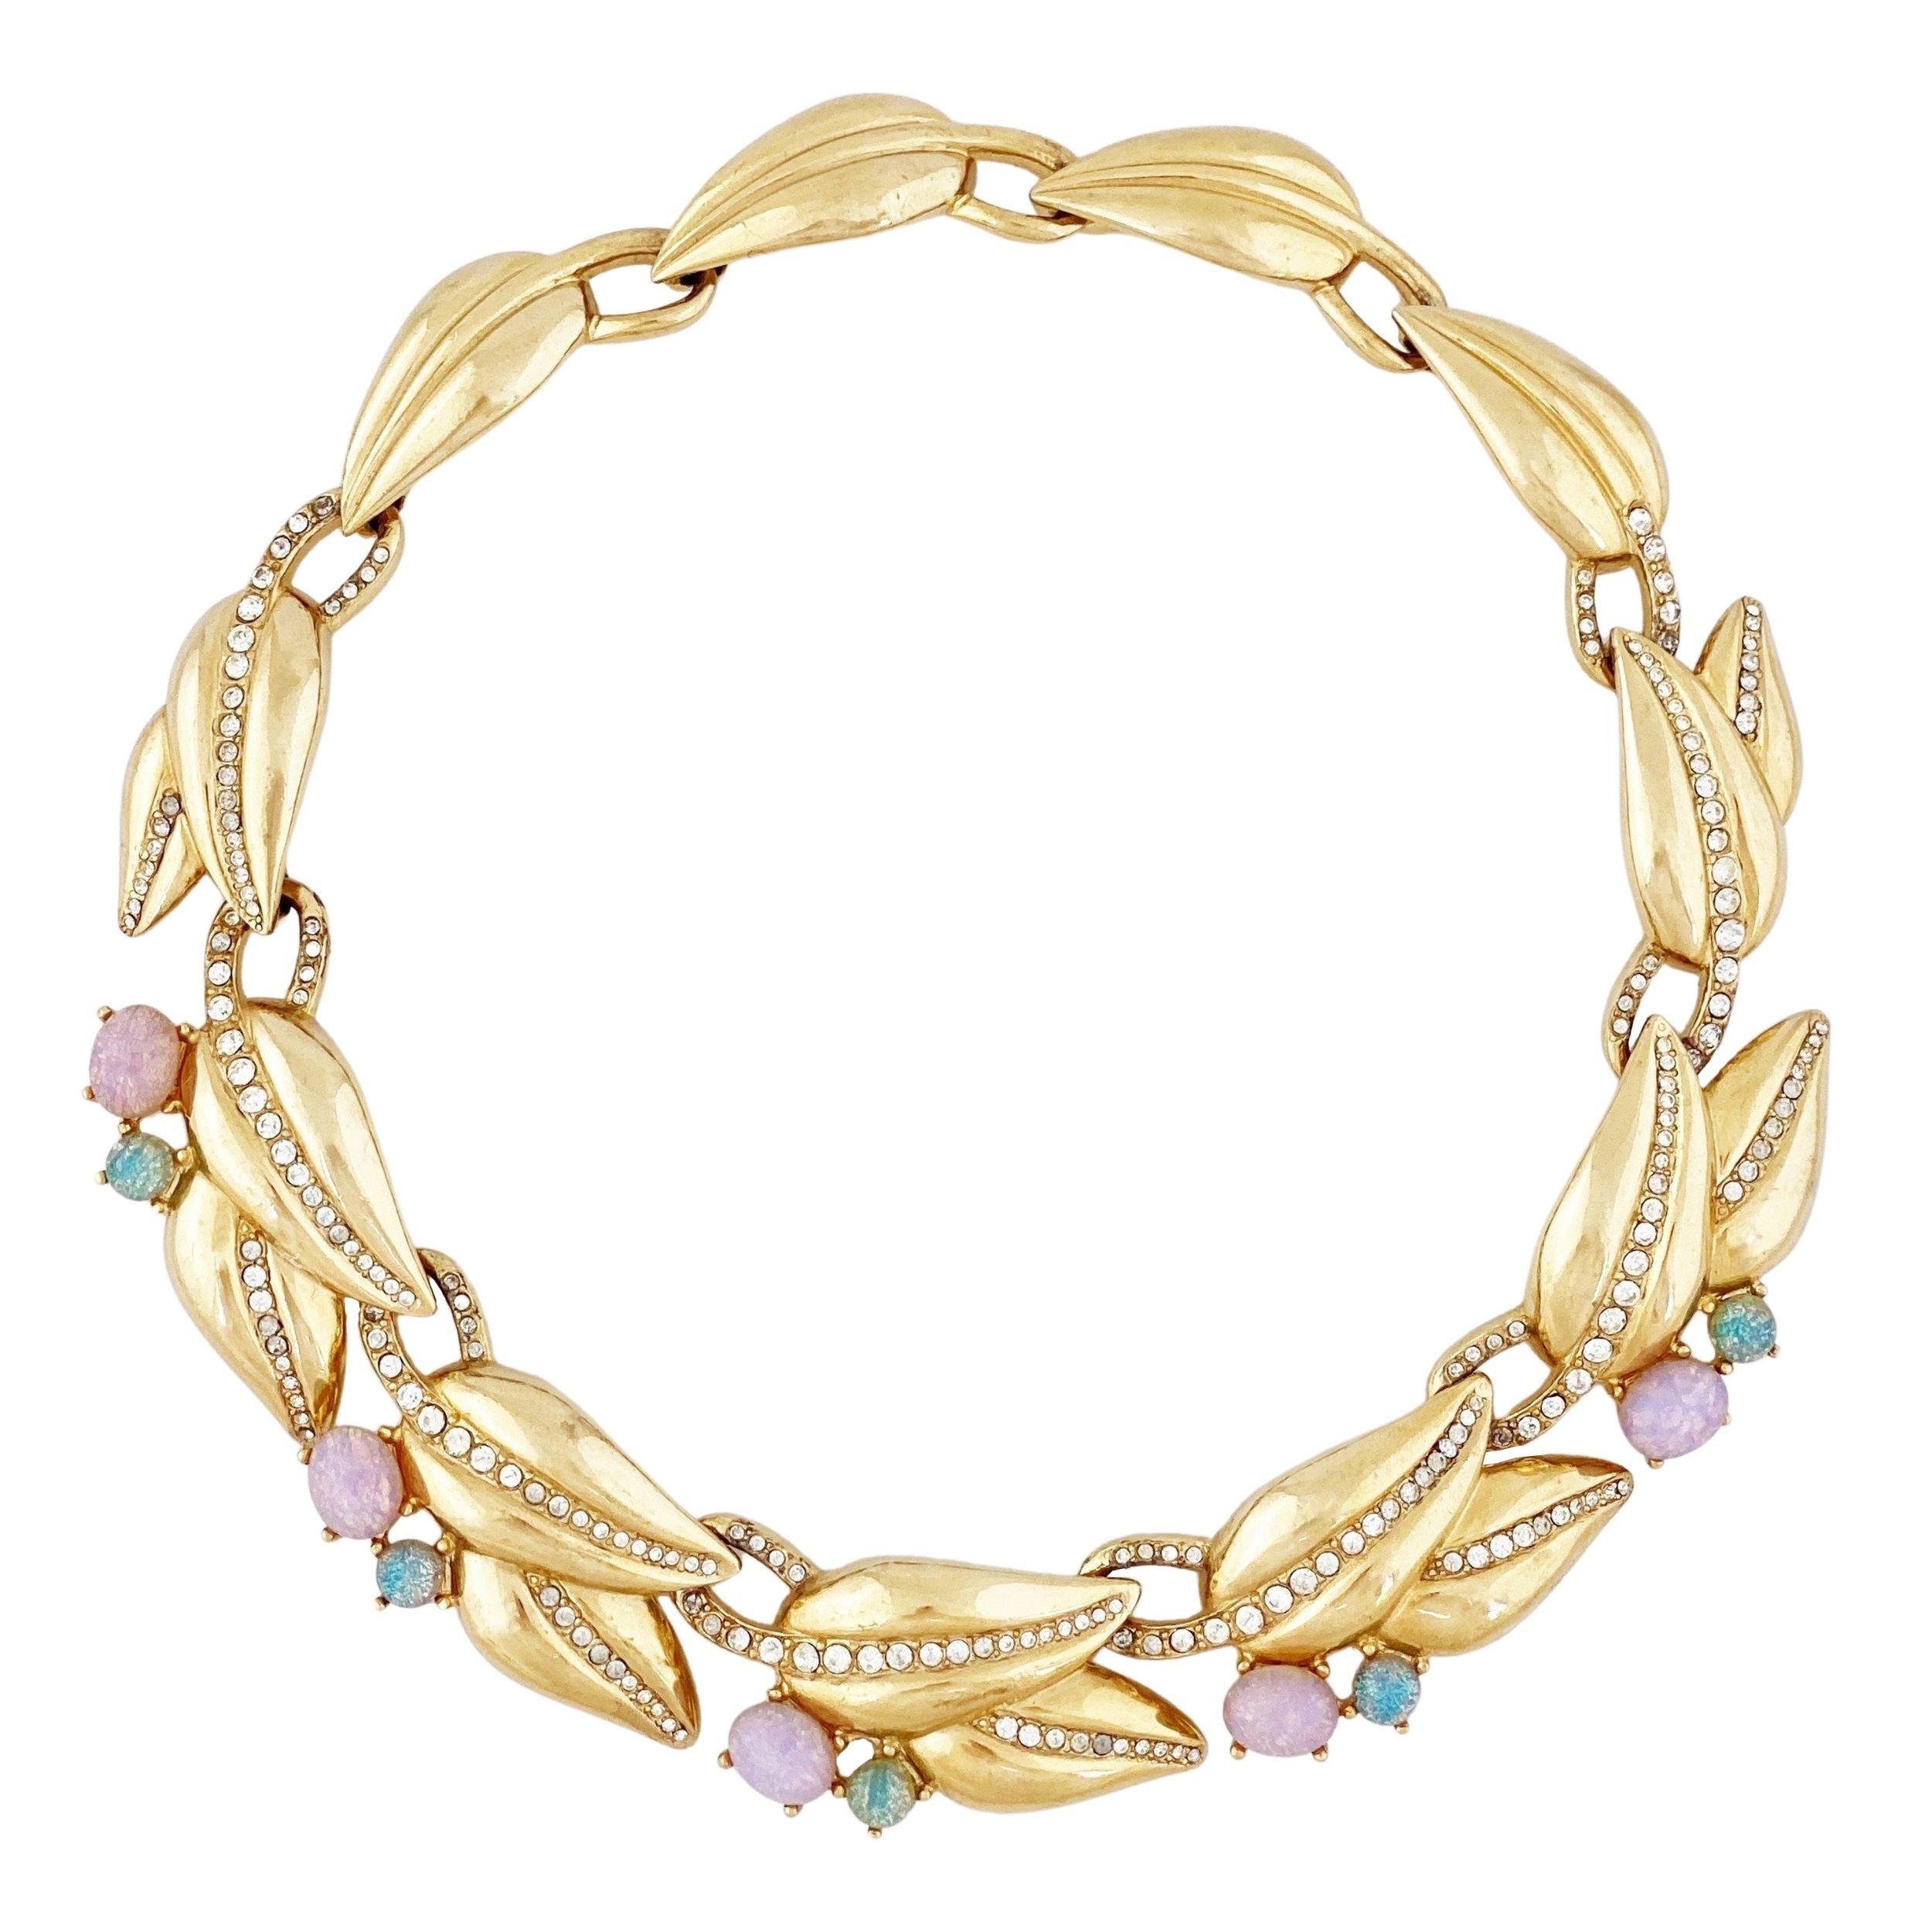 Gold Leaf Link Choker Necklace With Faux Opals By Givenchy, 1980s For Sale